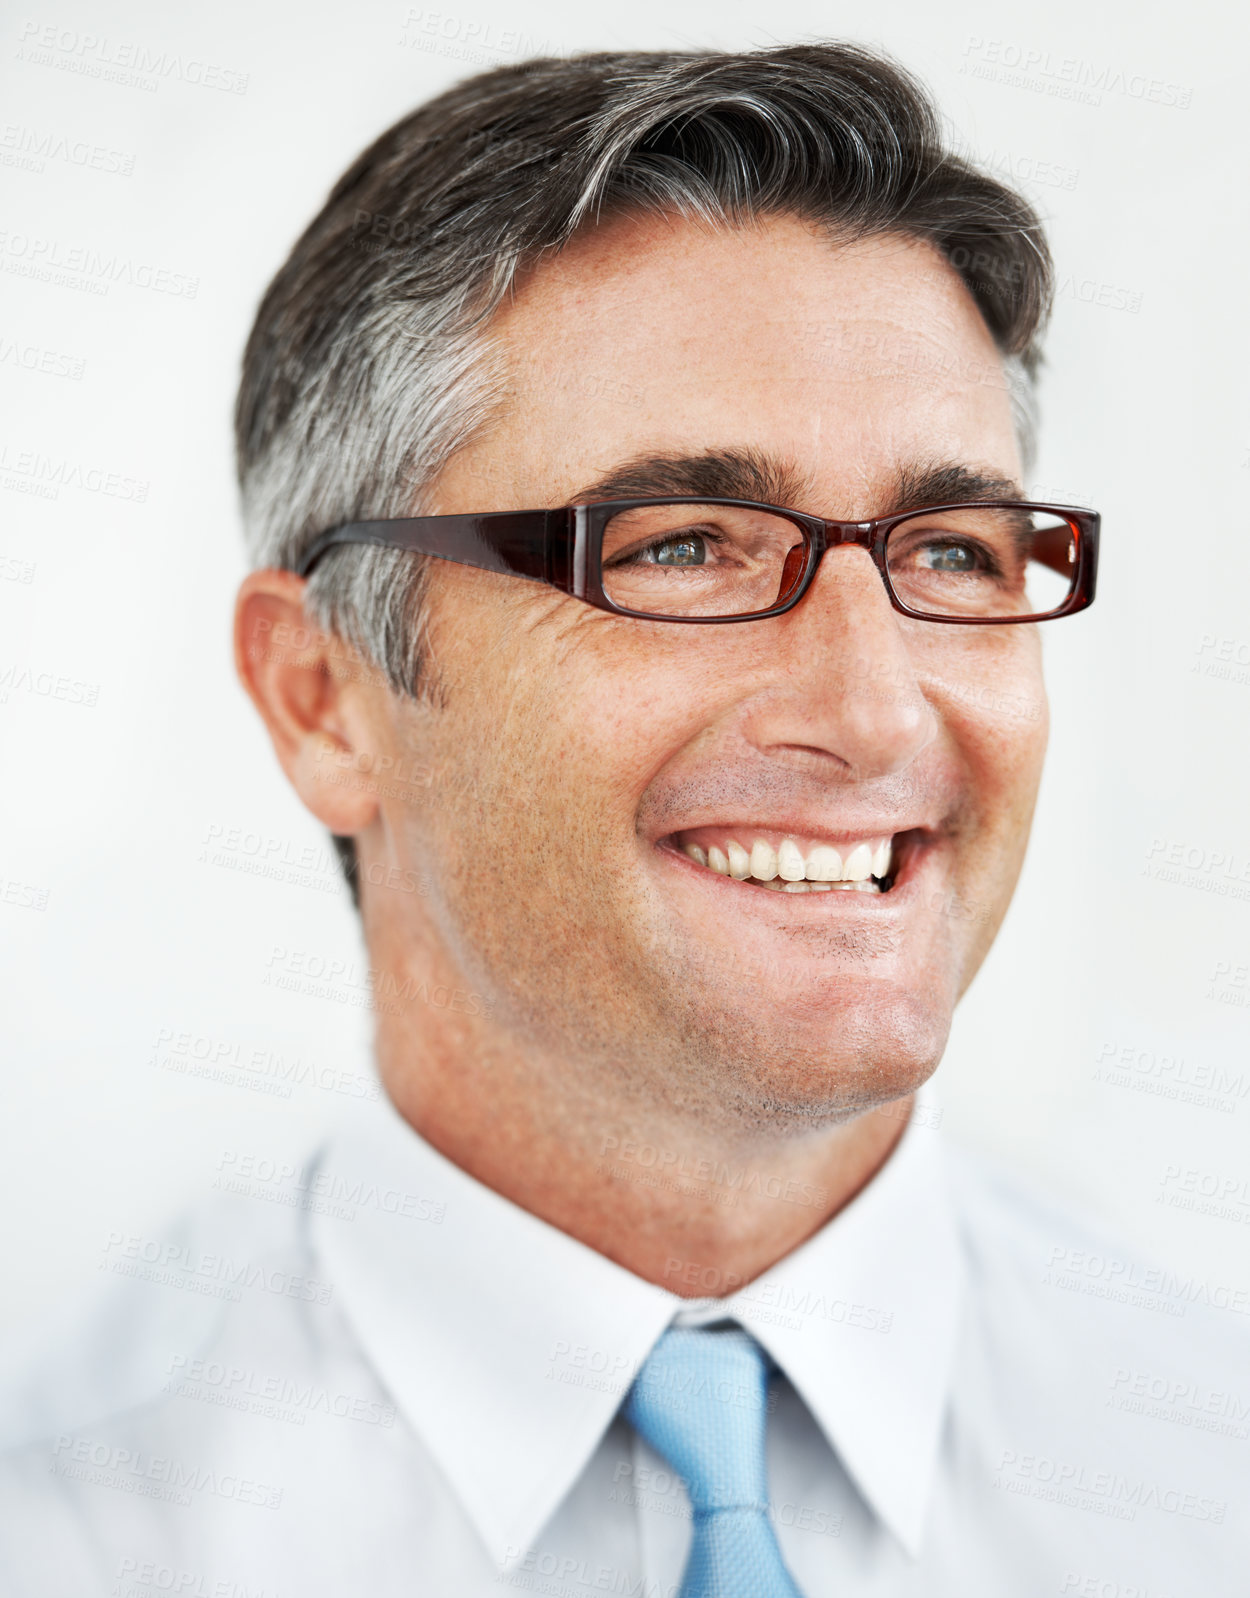 Buy stock photo Handsome mature businessman wearing glasses against a white background